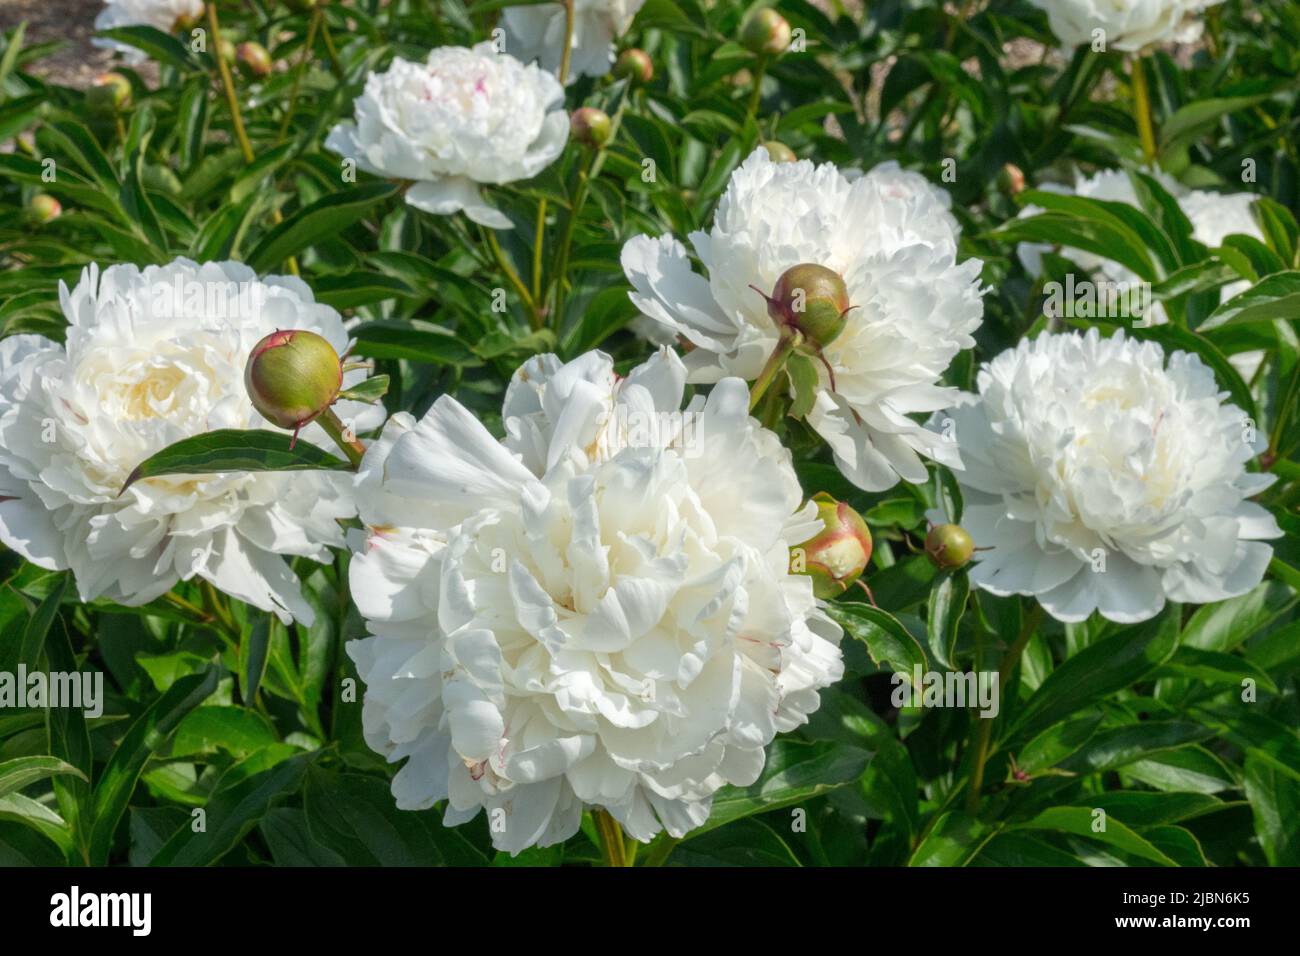 Nice, White, Flowers, In, Garden, Paeonia lactiflora, Blooms, Attractive, Peony, Blooming Peony 'Lady Darmouth' Stock Photo